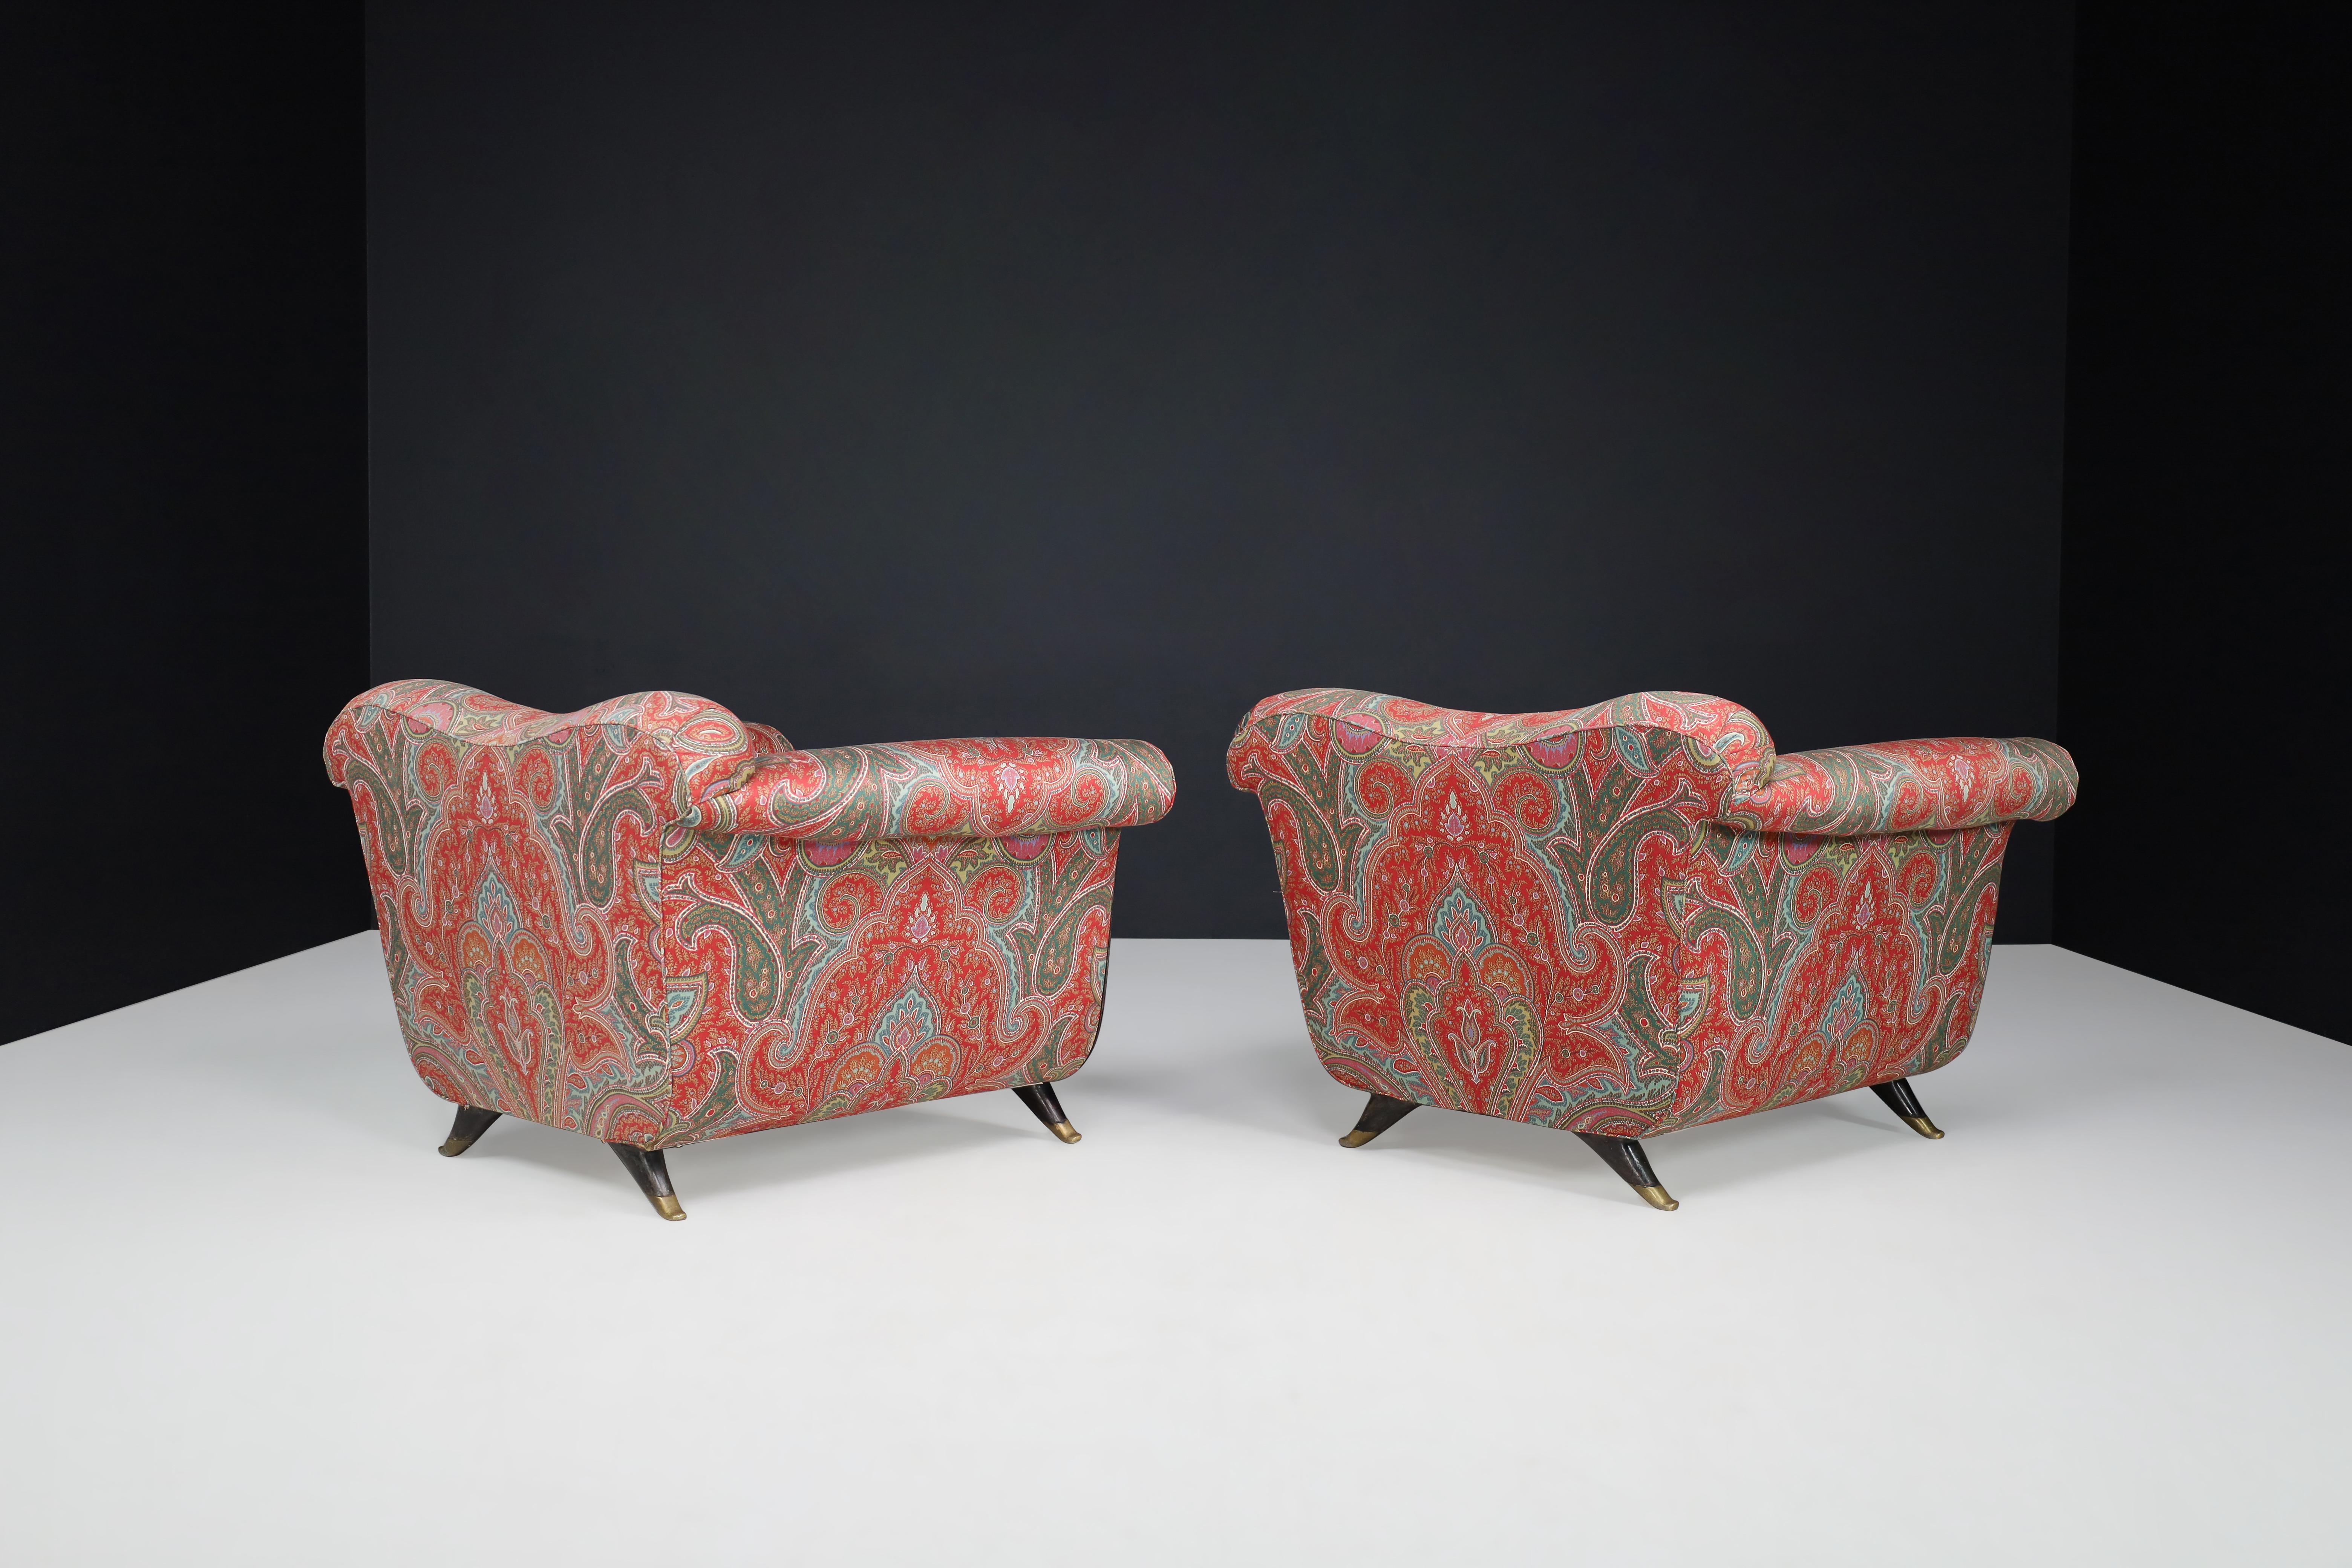 Guglielmo Ulrich Lounge Chairs in Walnut, Fabric, and Brass, Italy, 1930s  For Sale 6